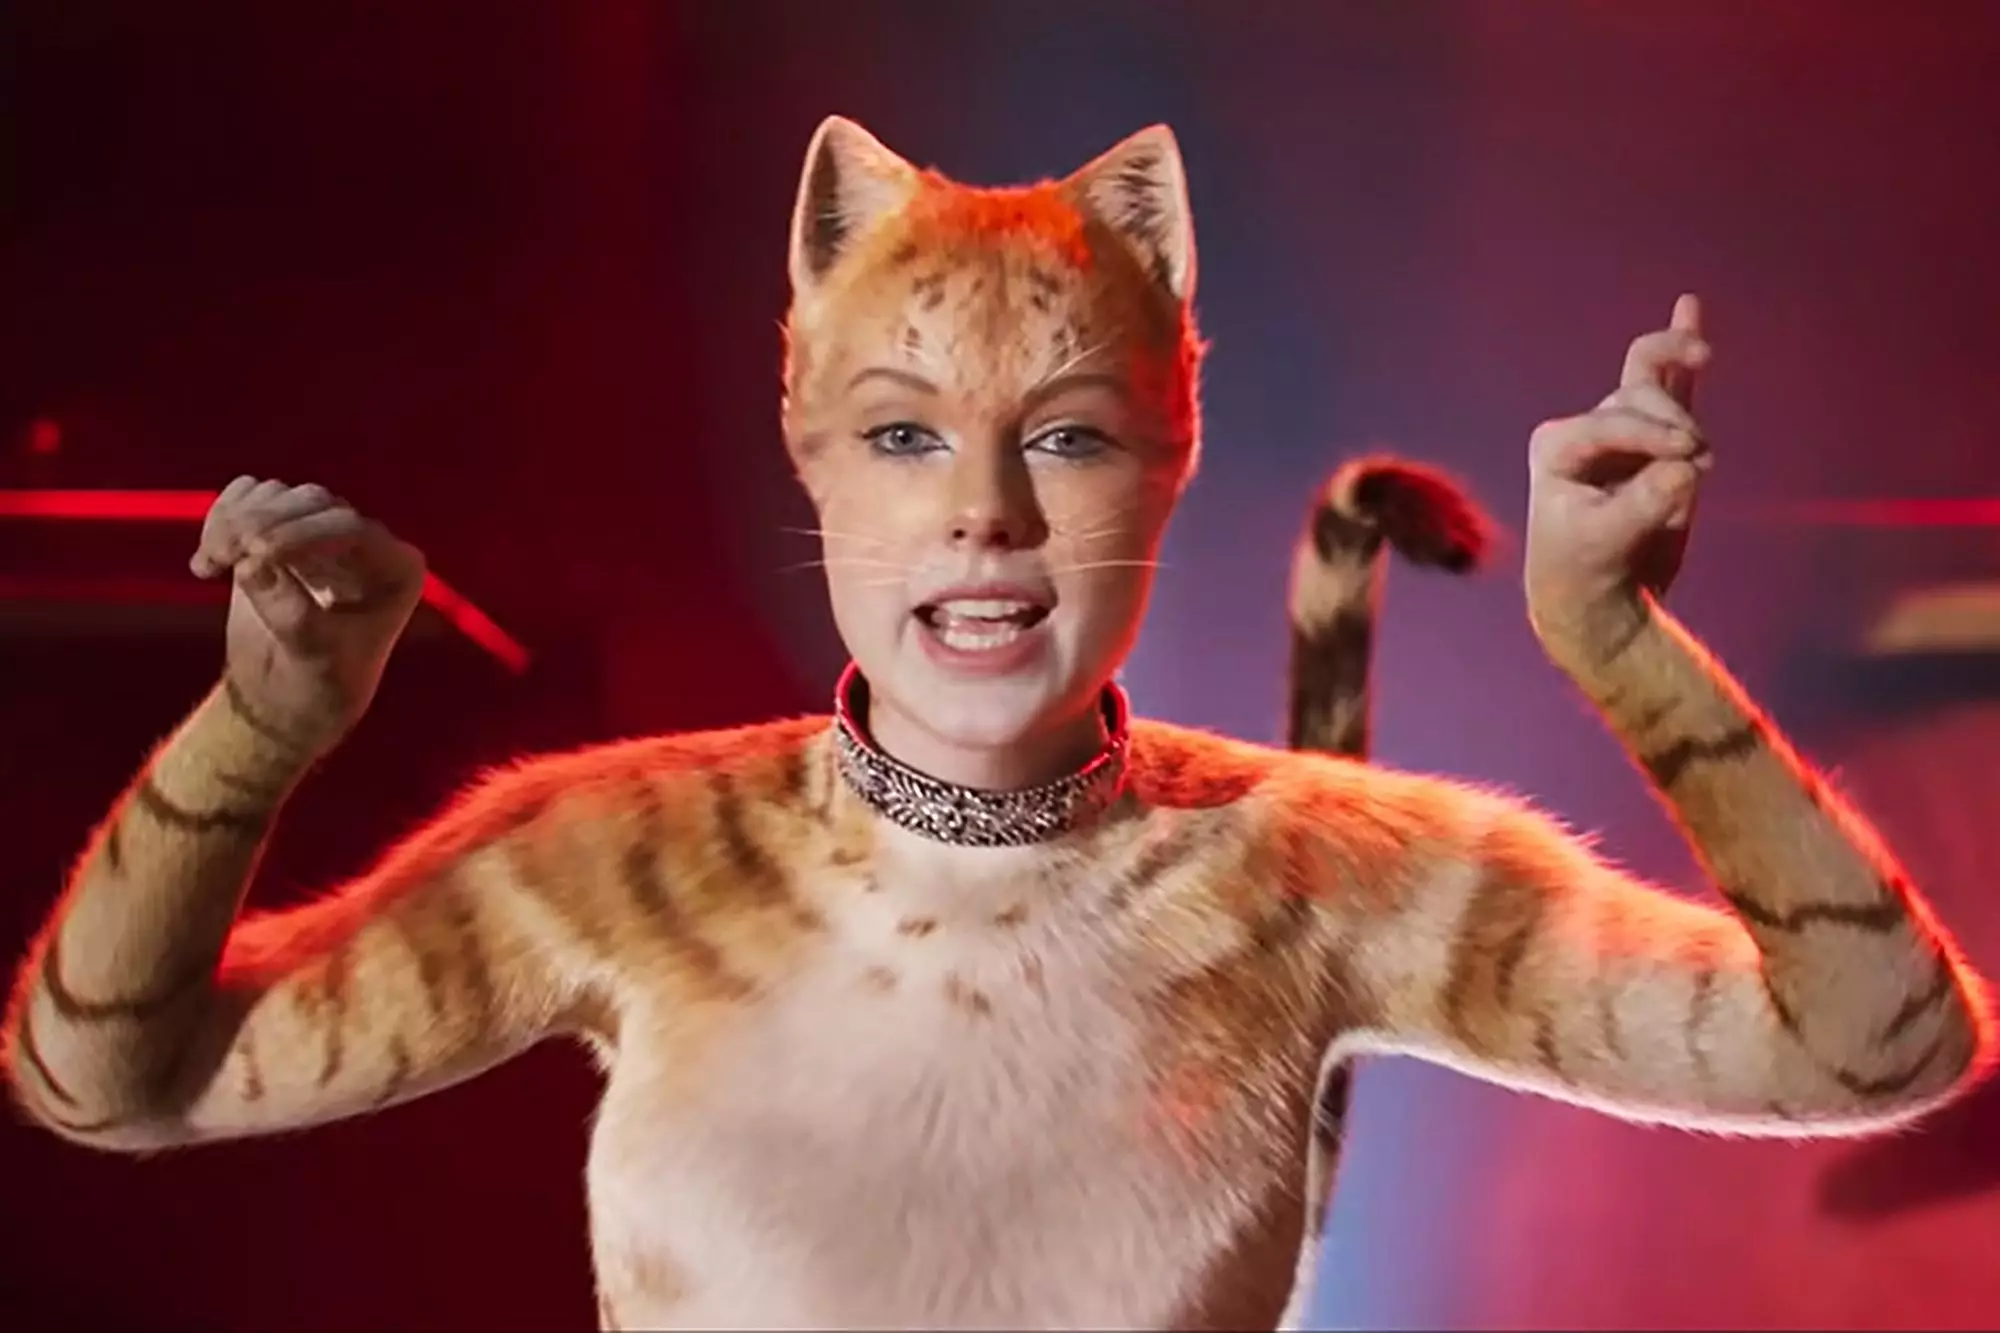 Seth Rogen watched Cats while high and live-tweeted the experience.